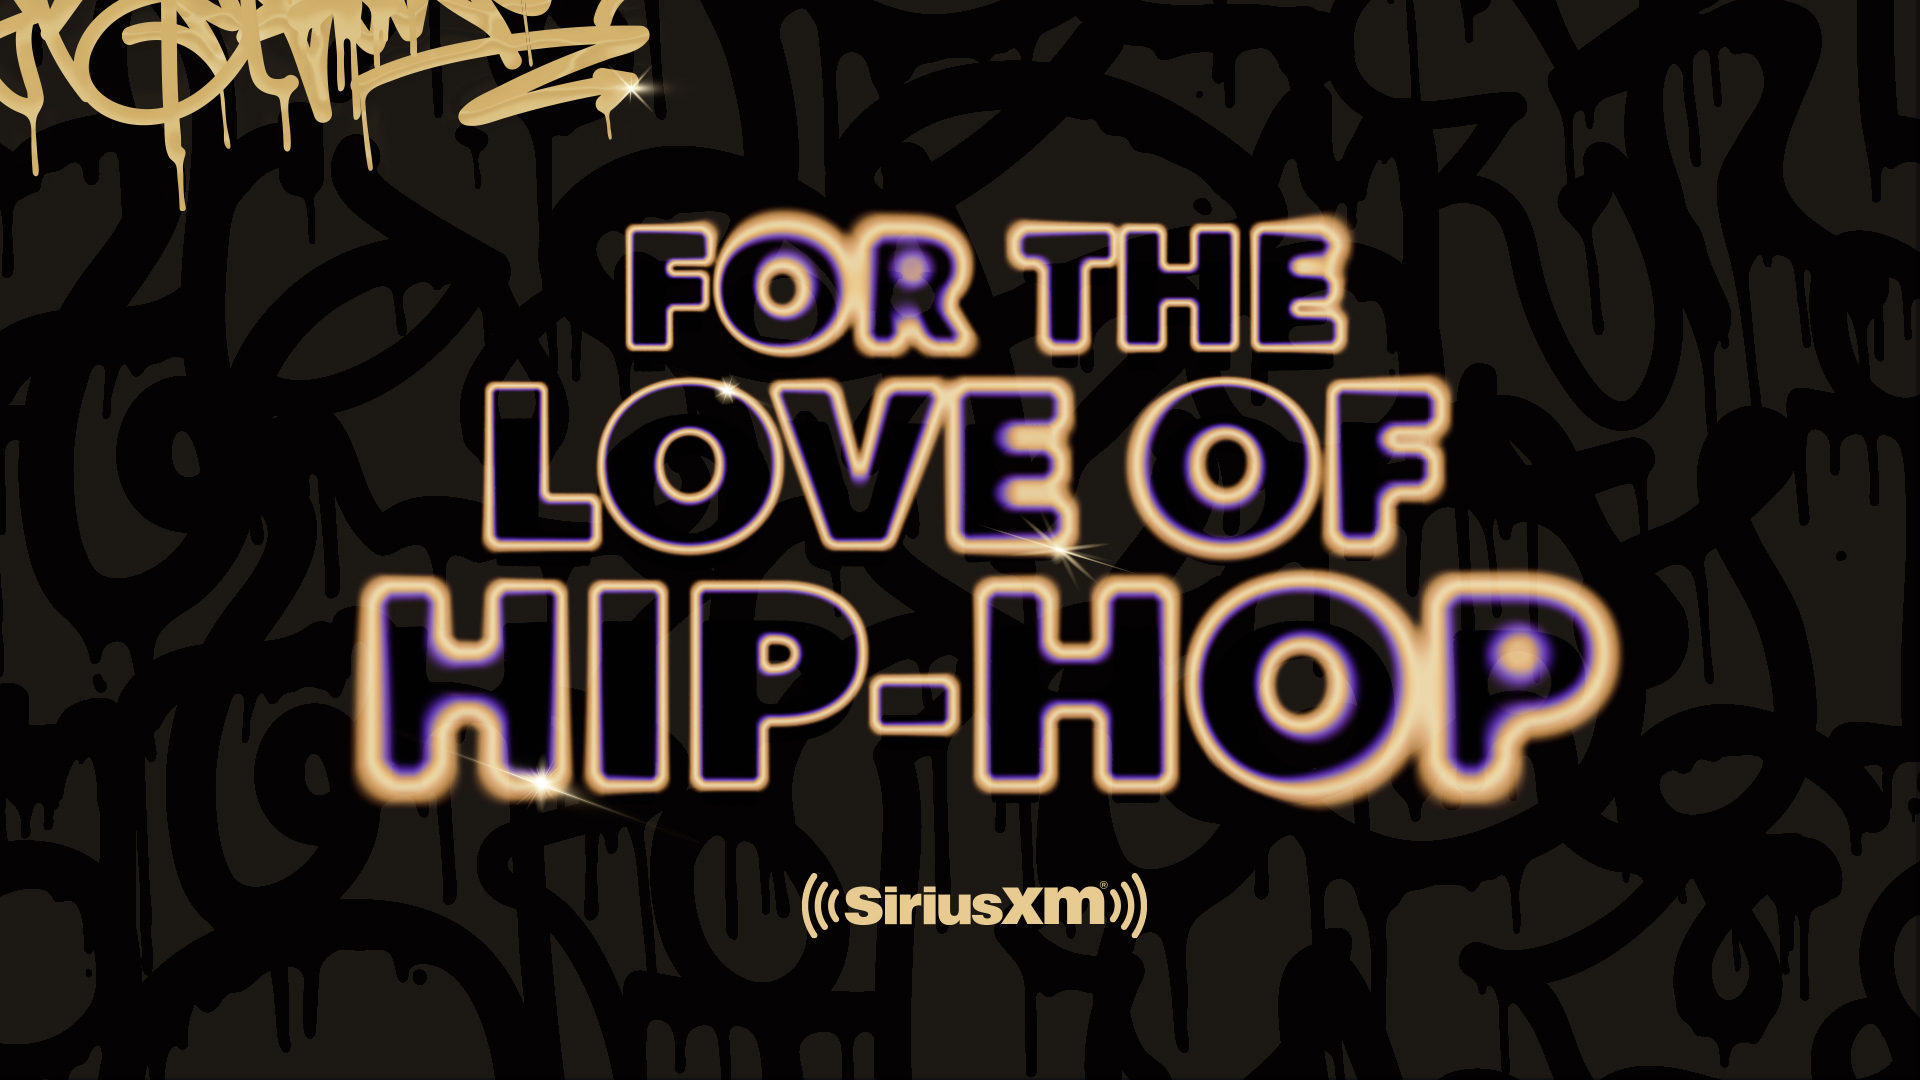 SiriusXM for the love of hip-hop